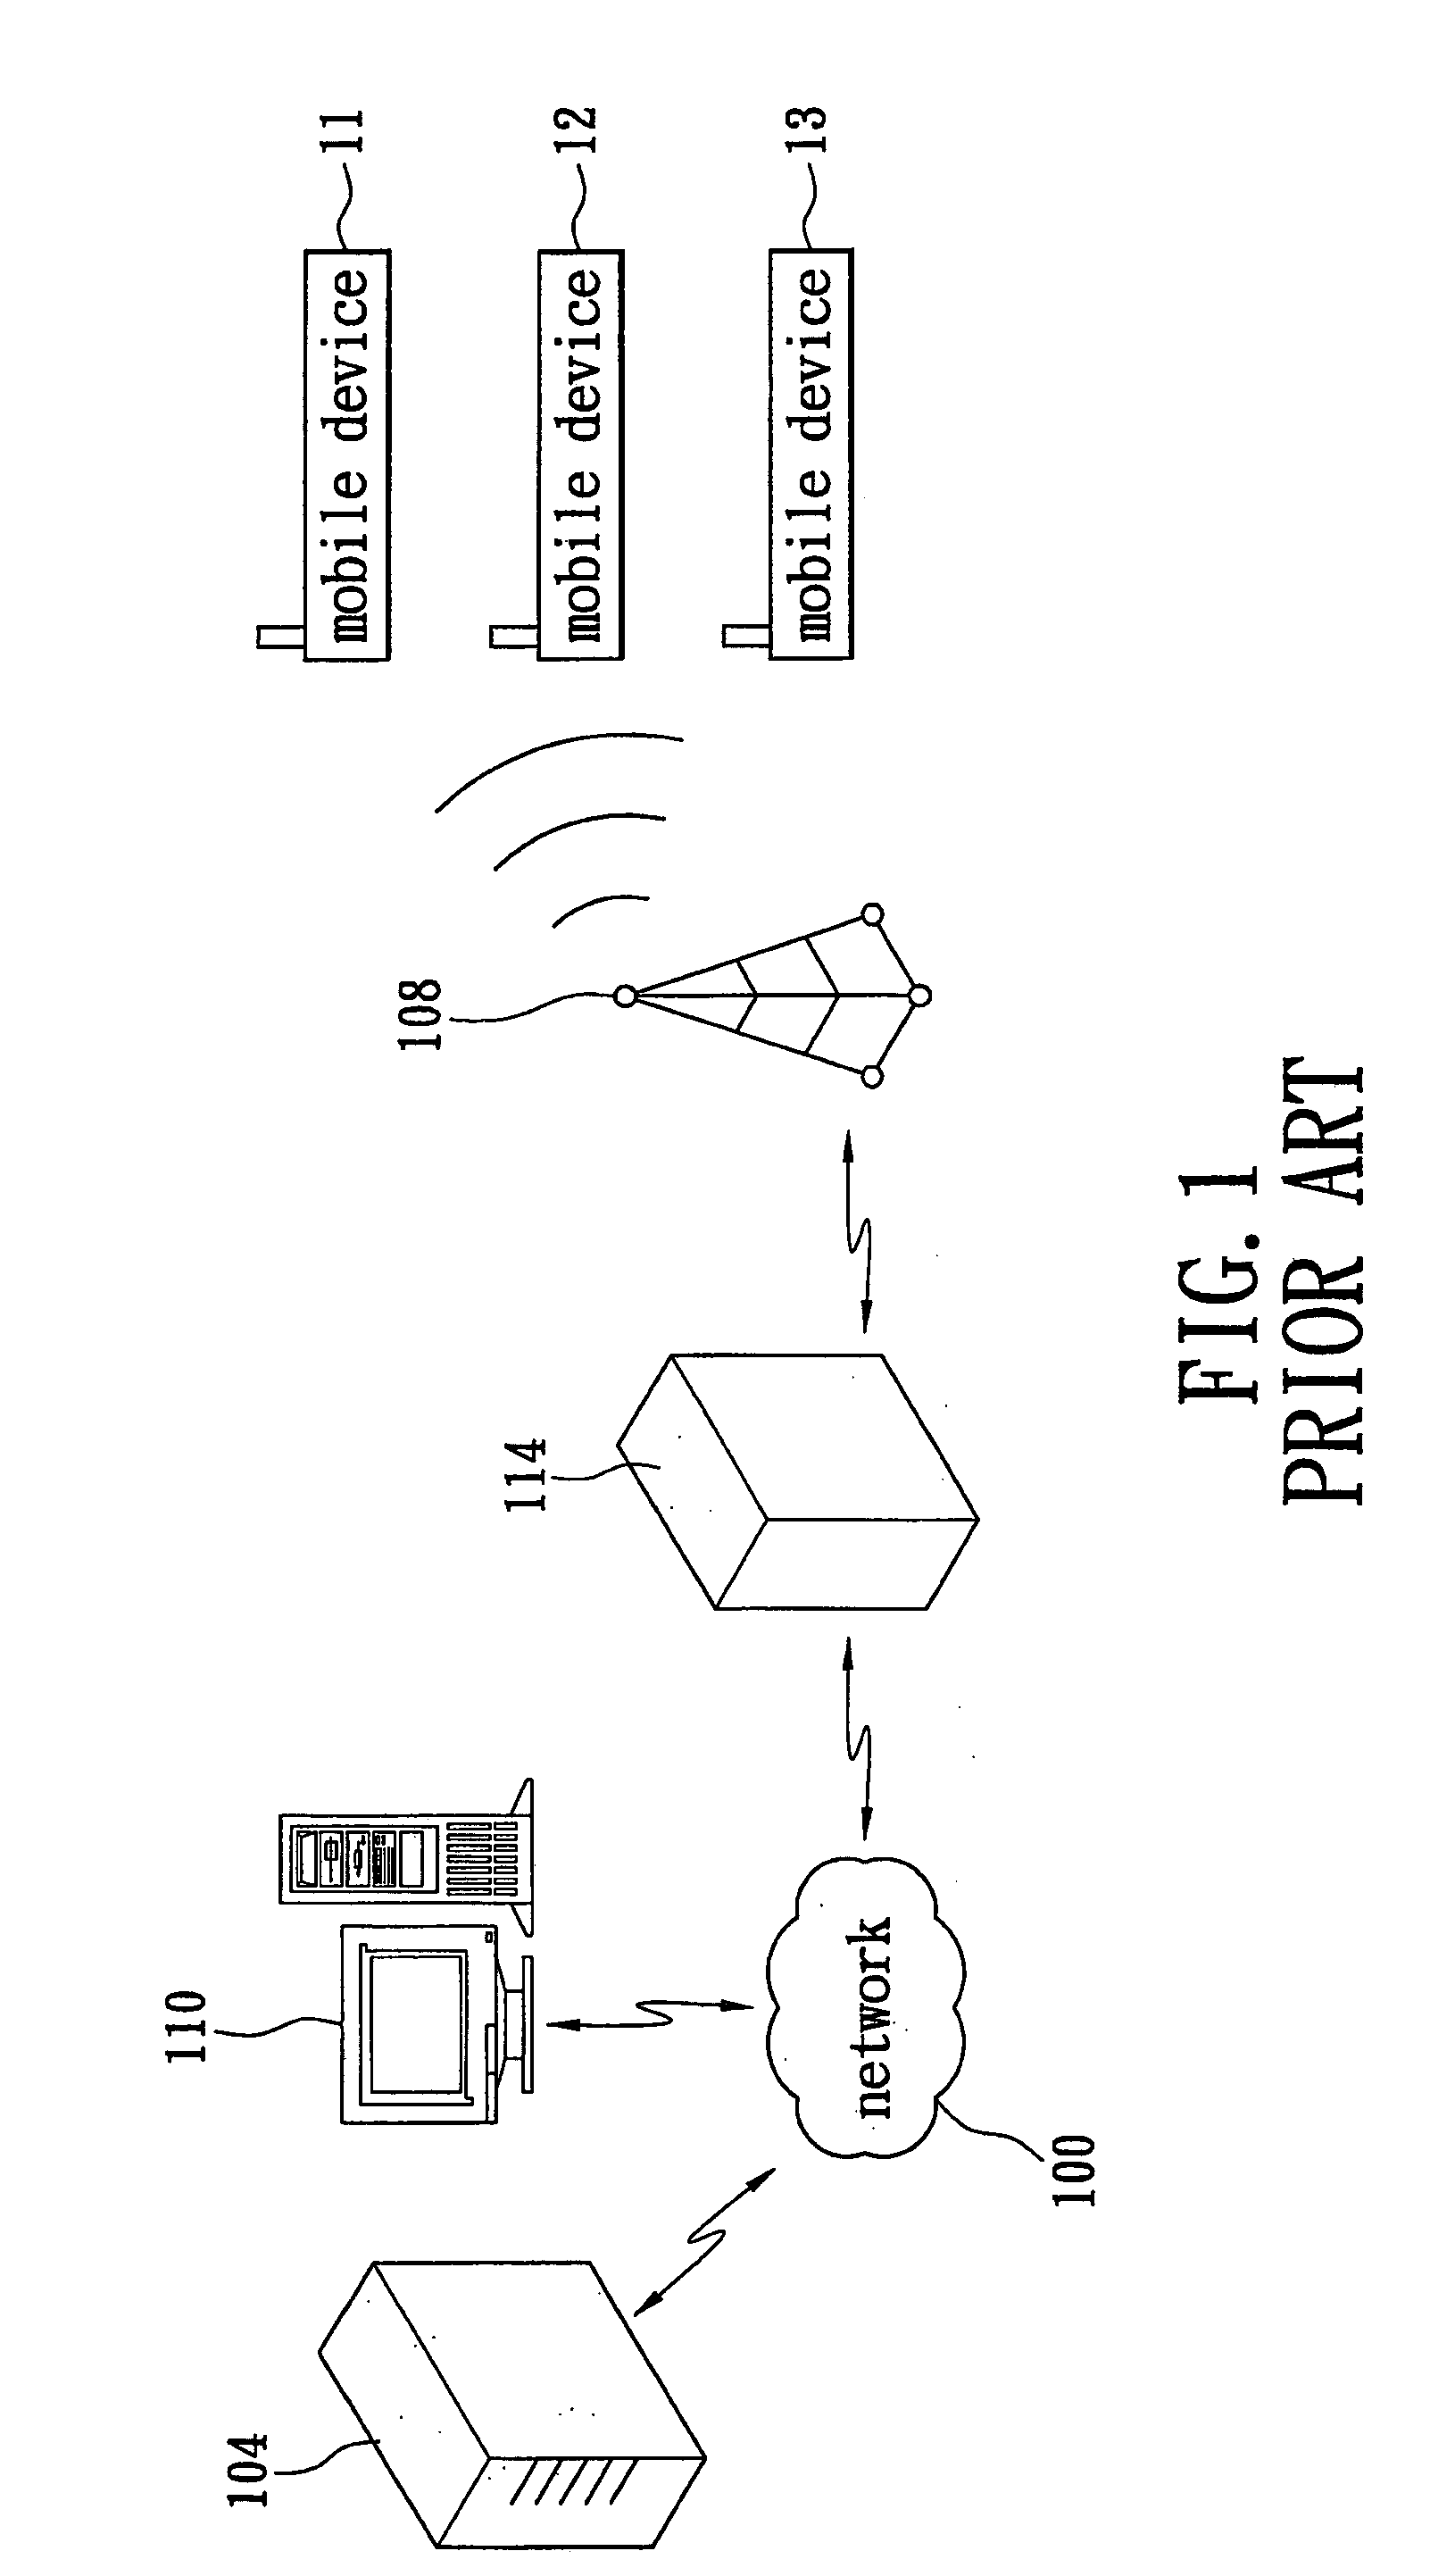 Method for displaying a real-time message on a mobile communication device